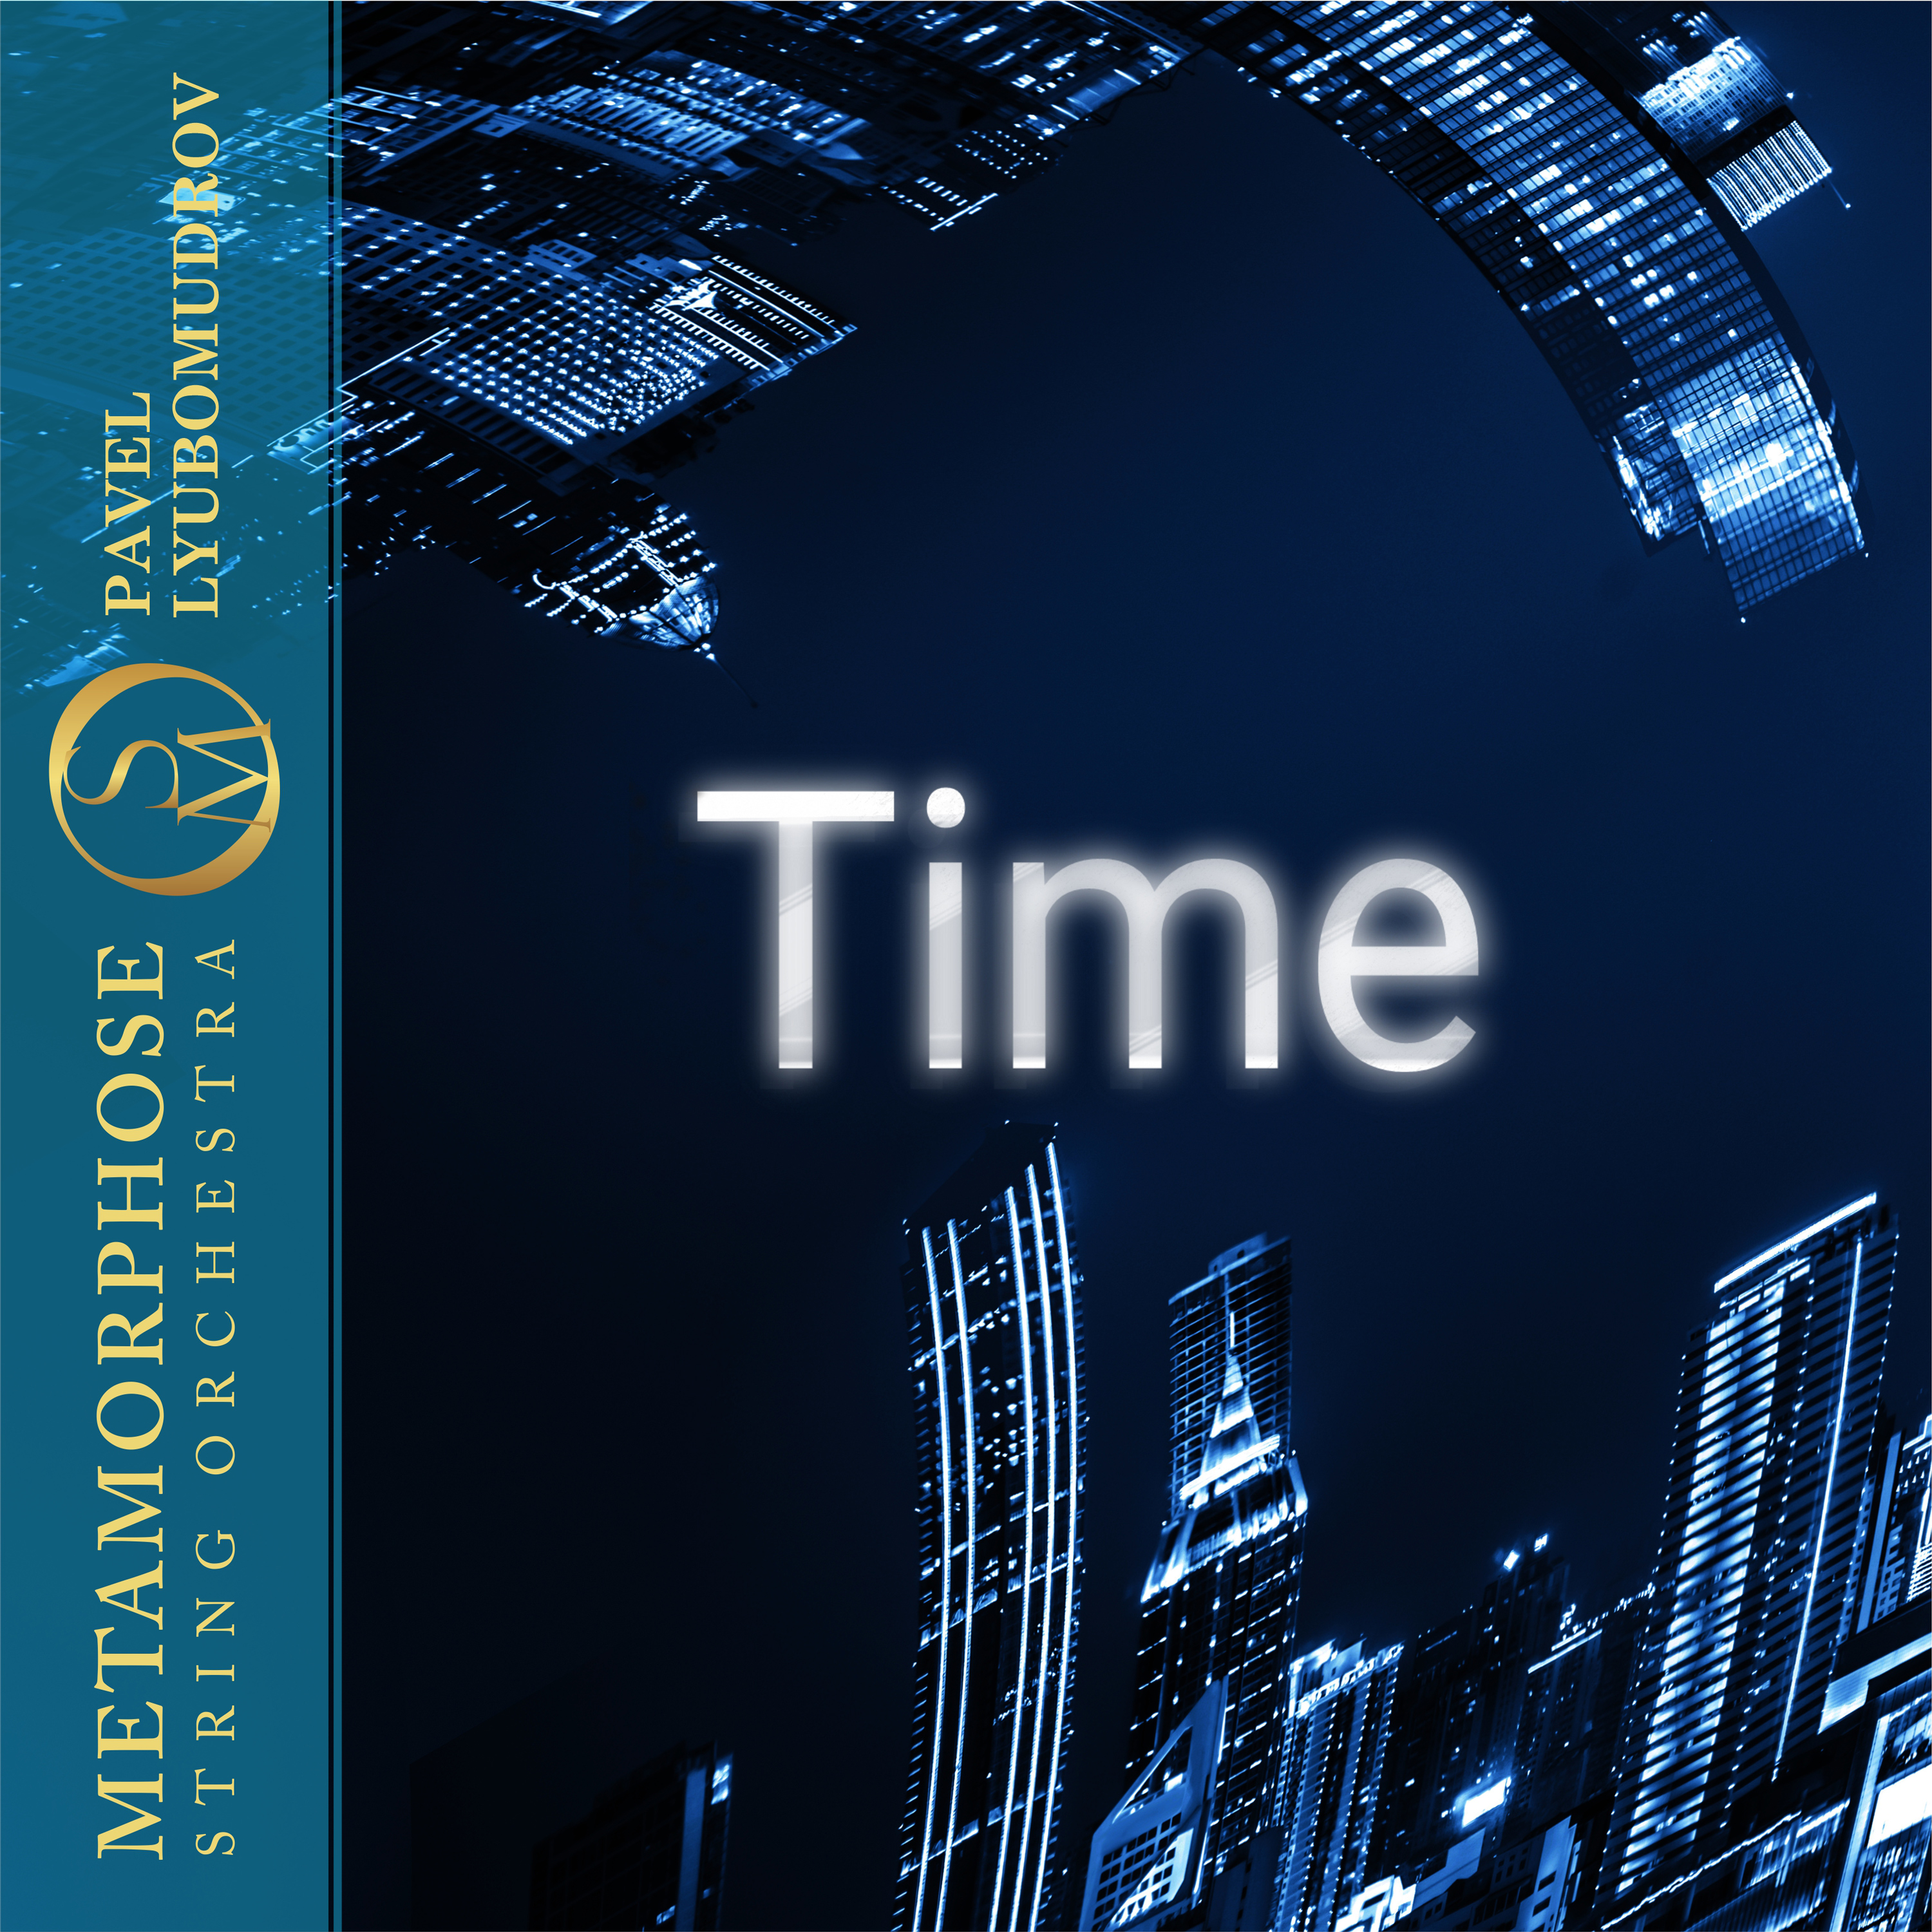 Time (from 